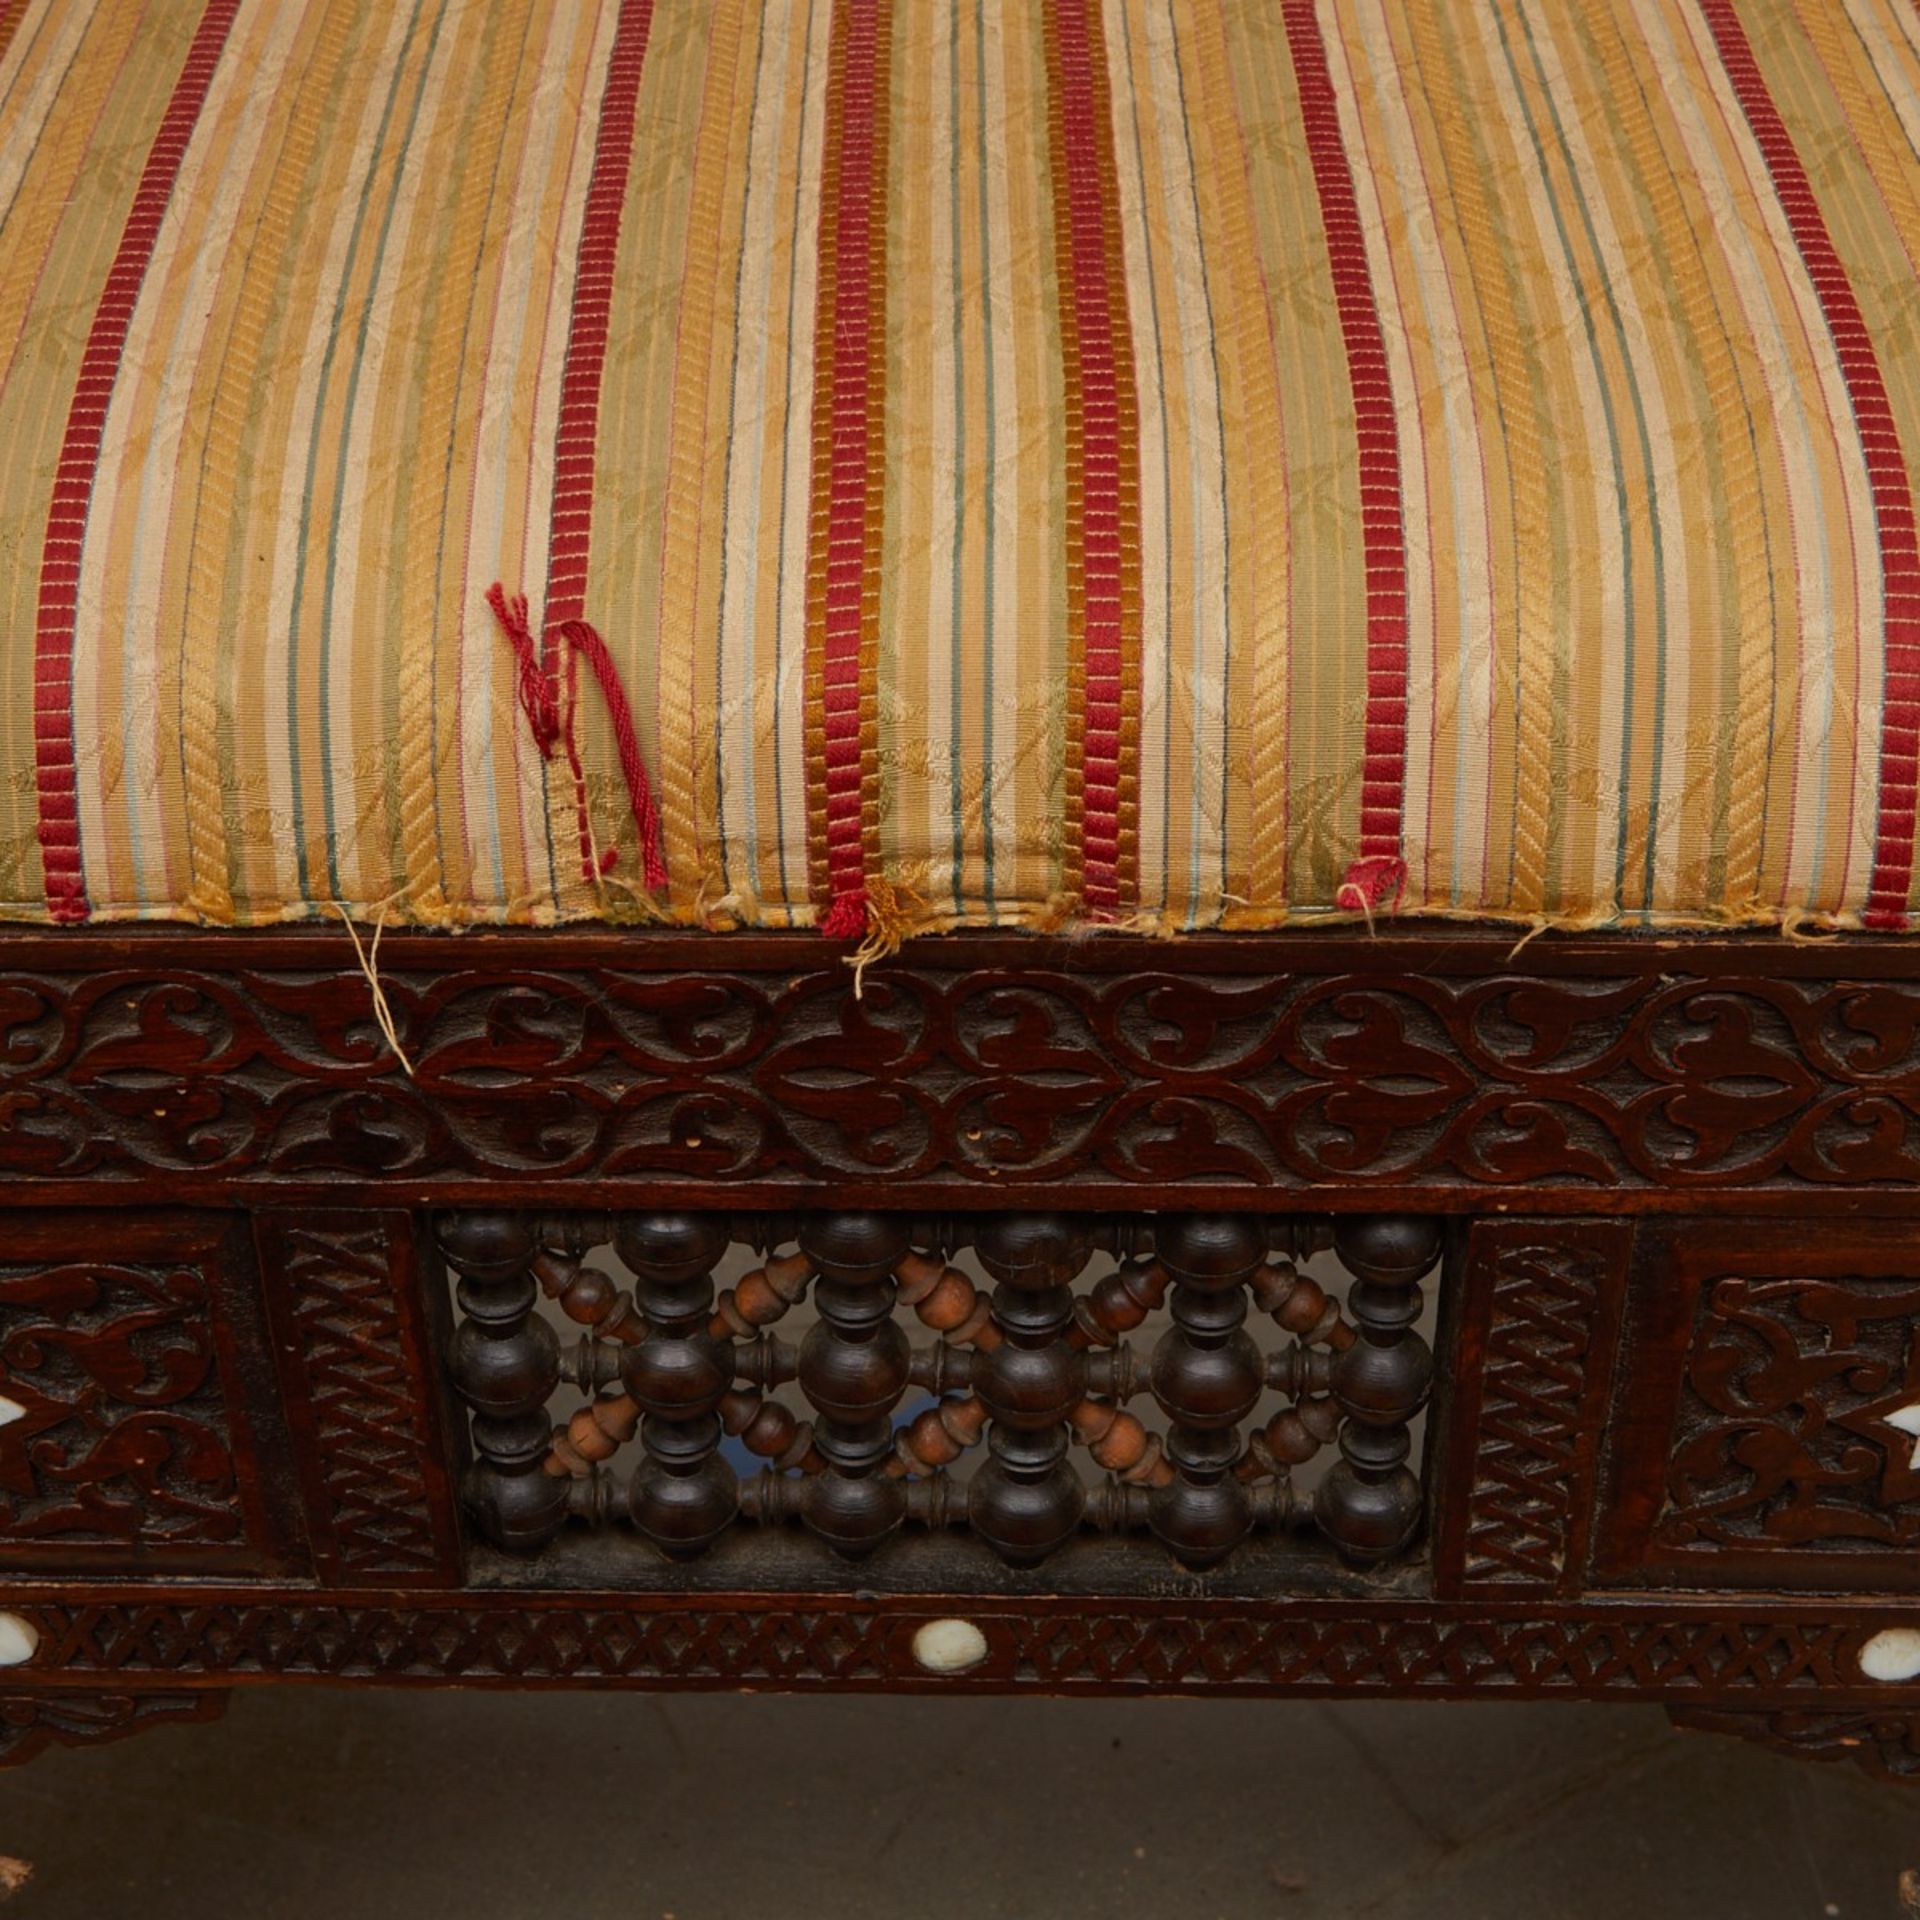 Syrian Mother of Pearl Inlaid Armchair - Image 7 of 9